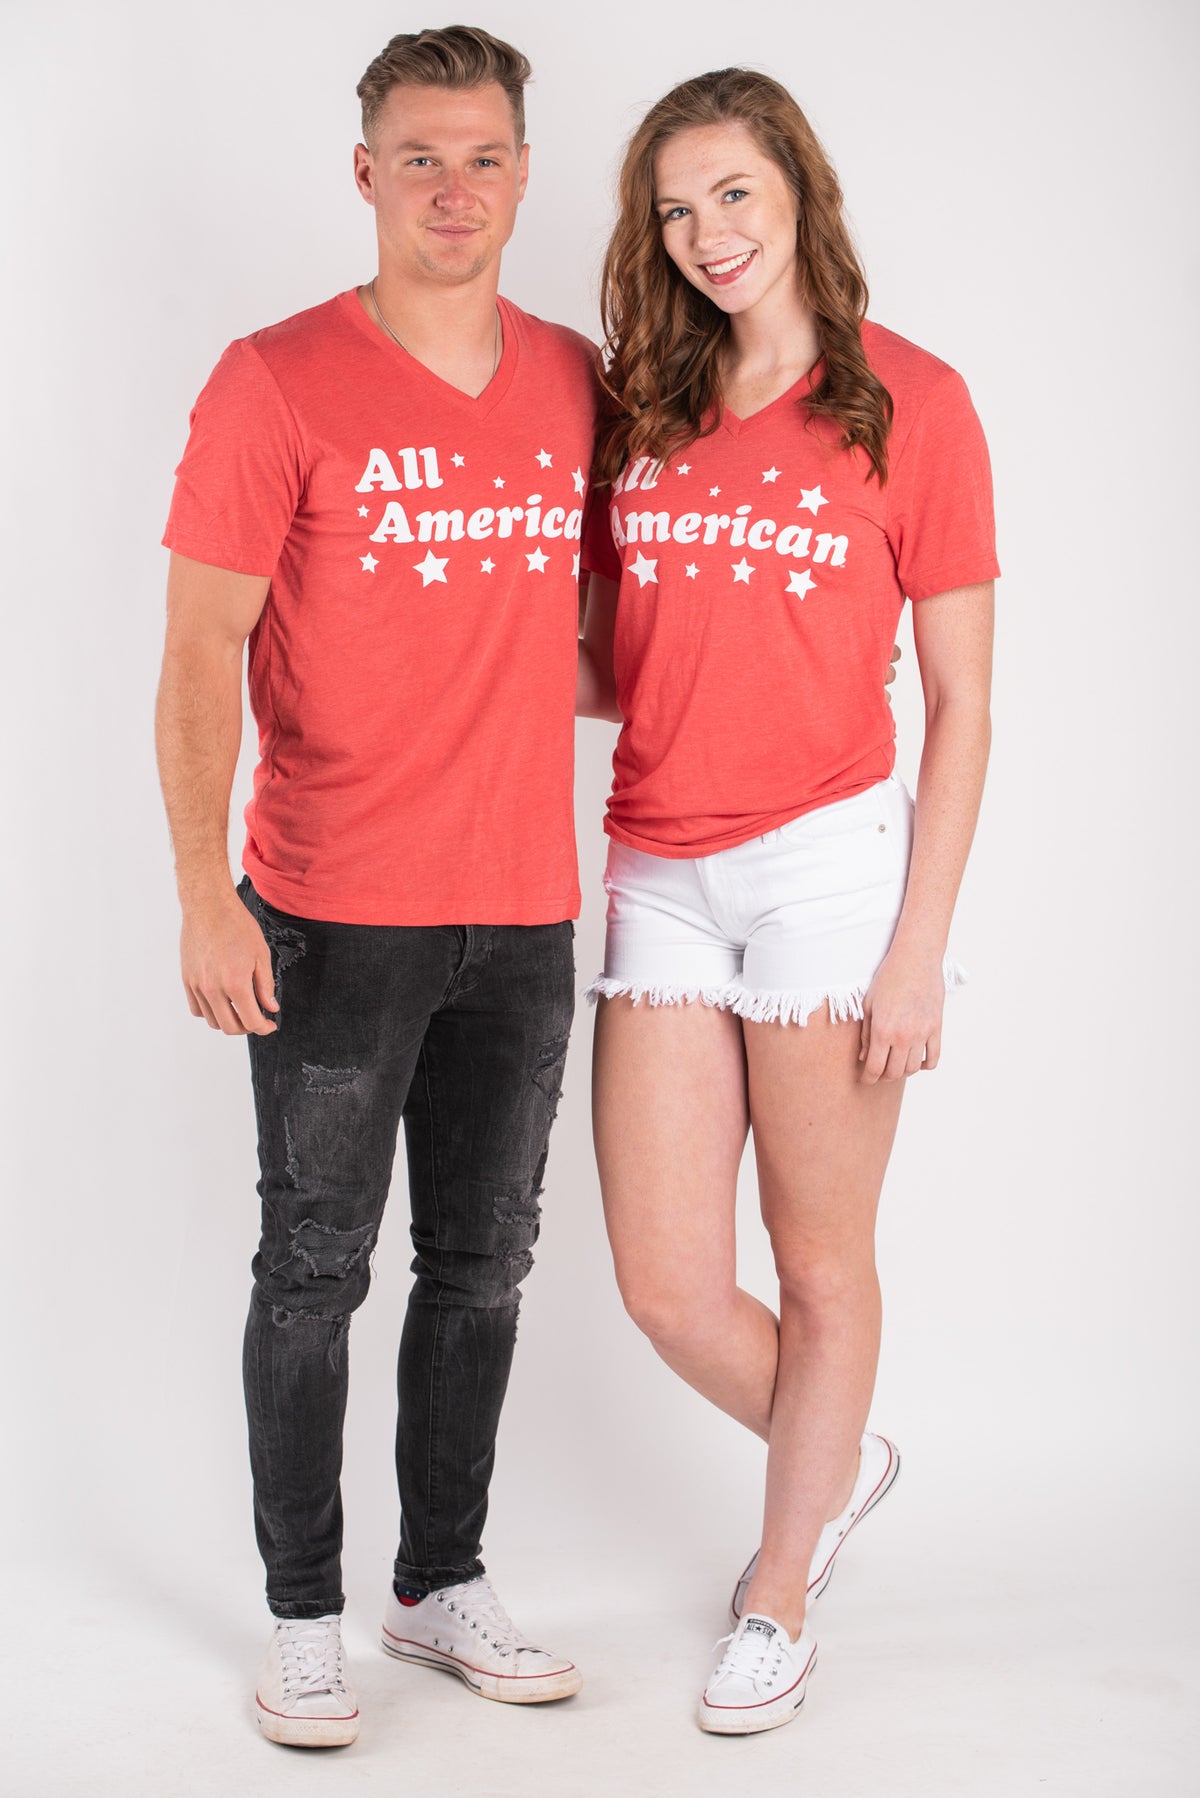 All American unisex v-neck short sleeve t-shirt red - Stylish T-shirts - Trendy Graphic T-Shirts and Tank Tops at Lush Fashion Lounge Boutique in Oklahoma City